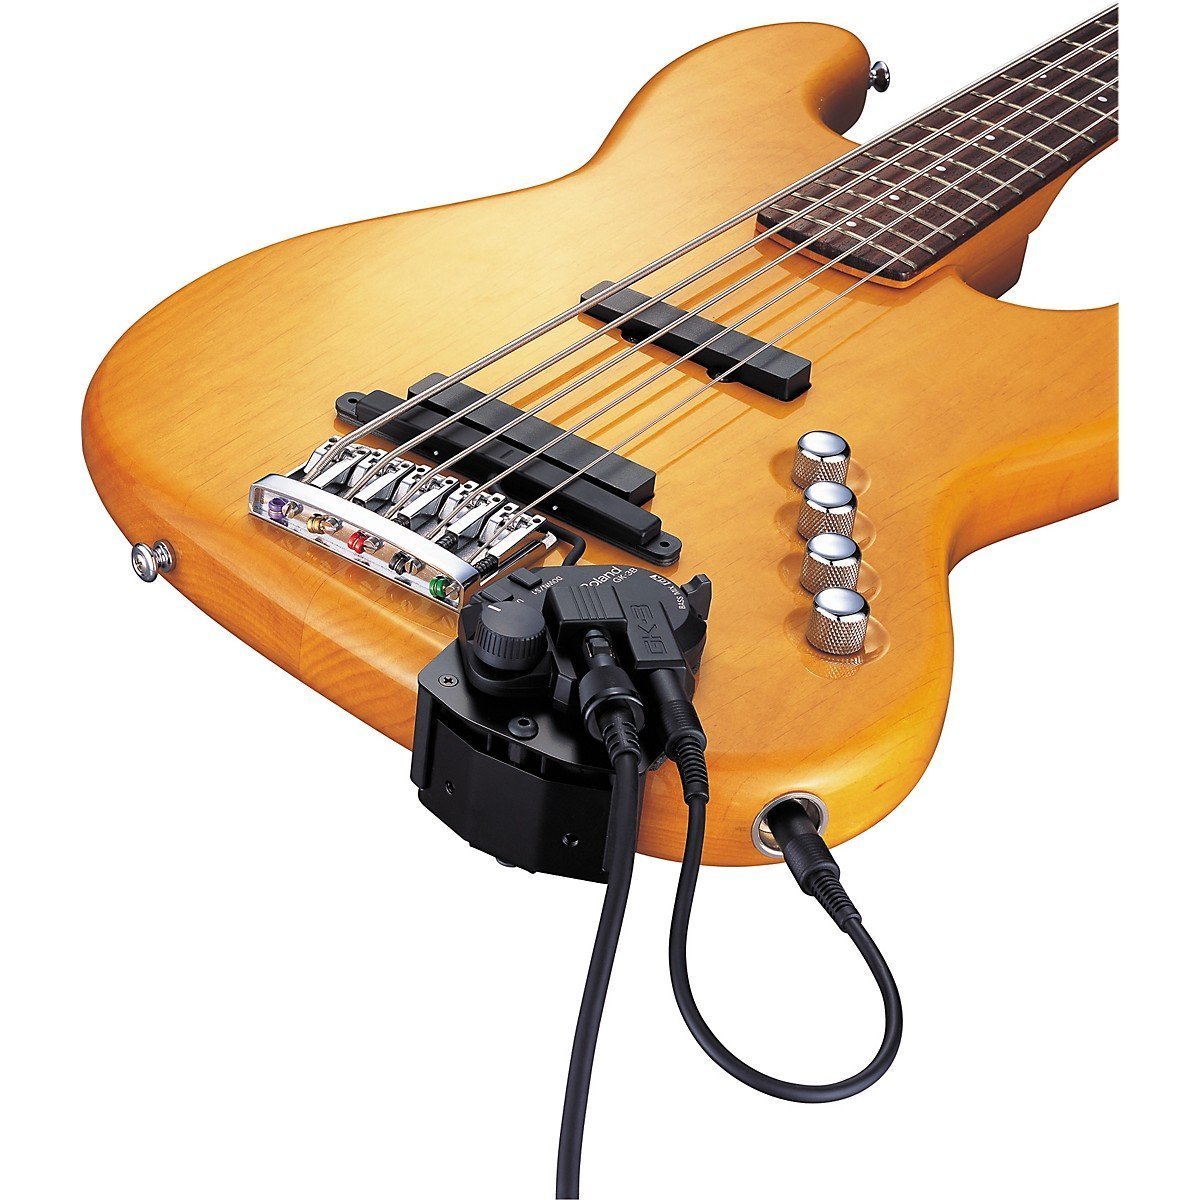 Roland GK-3B Divided Bass Pickup Guitar Synthesizer with Ultra-thin Design and Large, Smooth-action Volume Knob